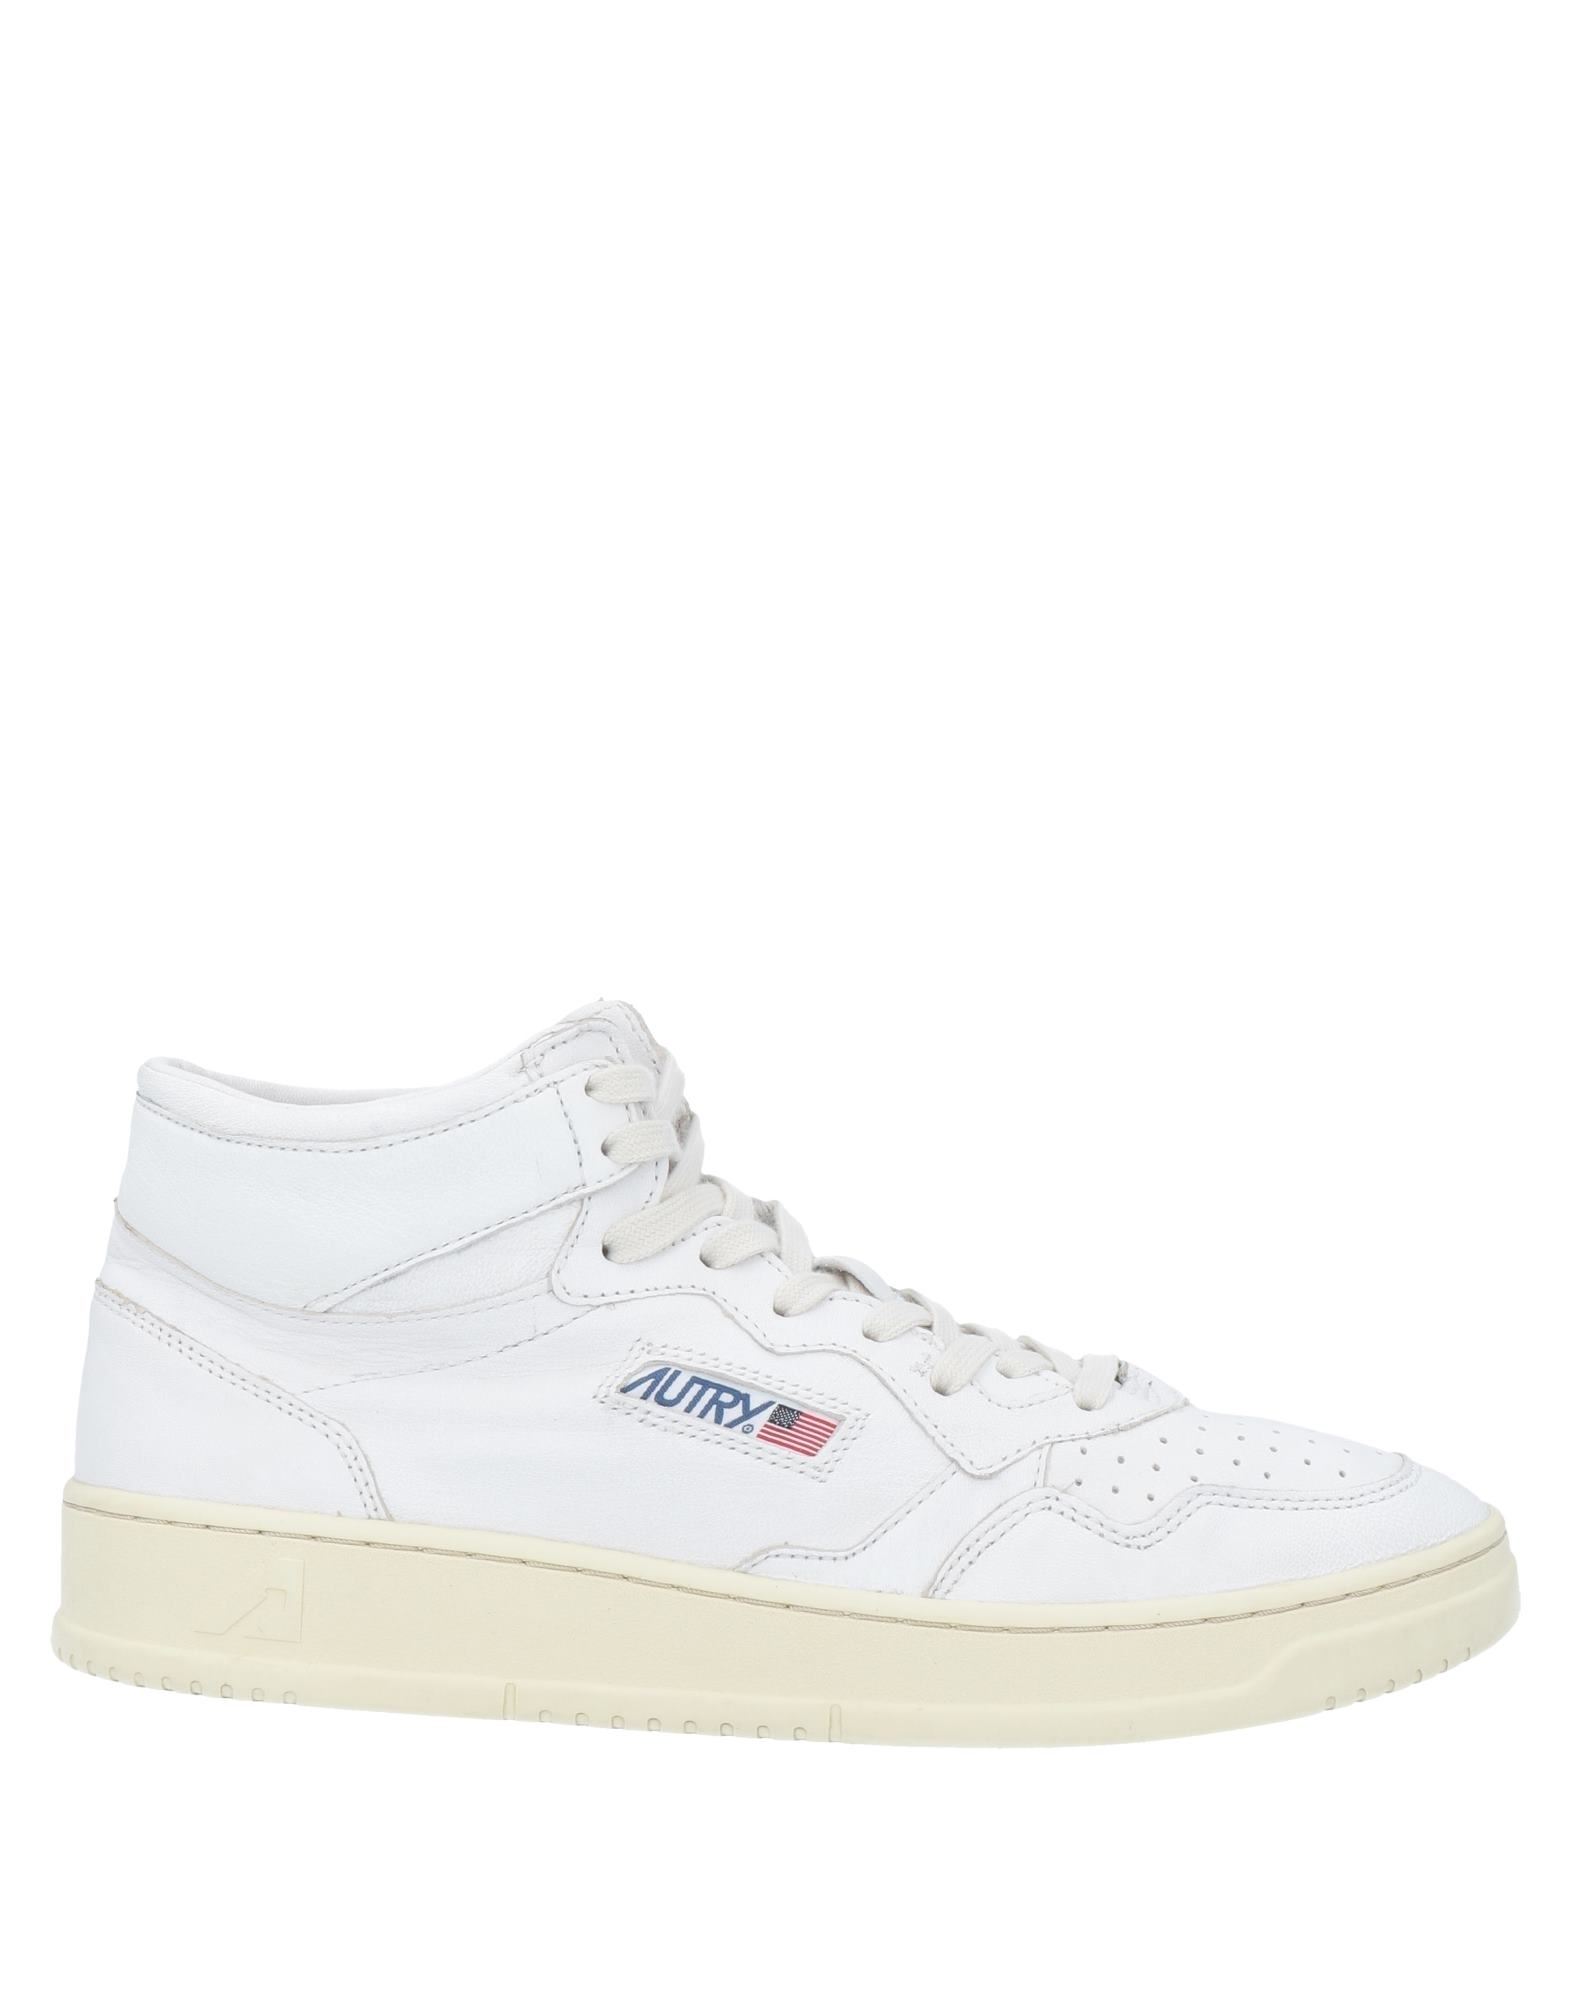 Shop Autry Woman Sneakers White Size 7 Goat Skin